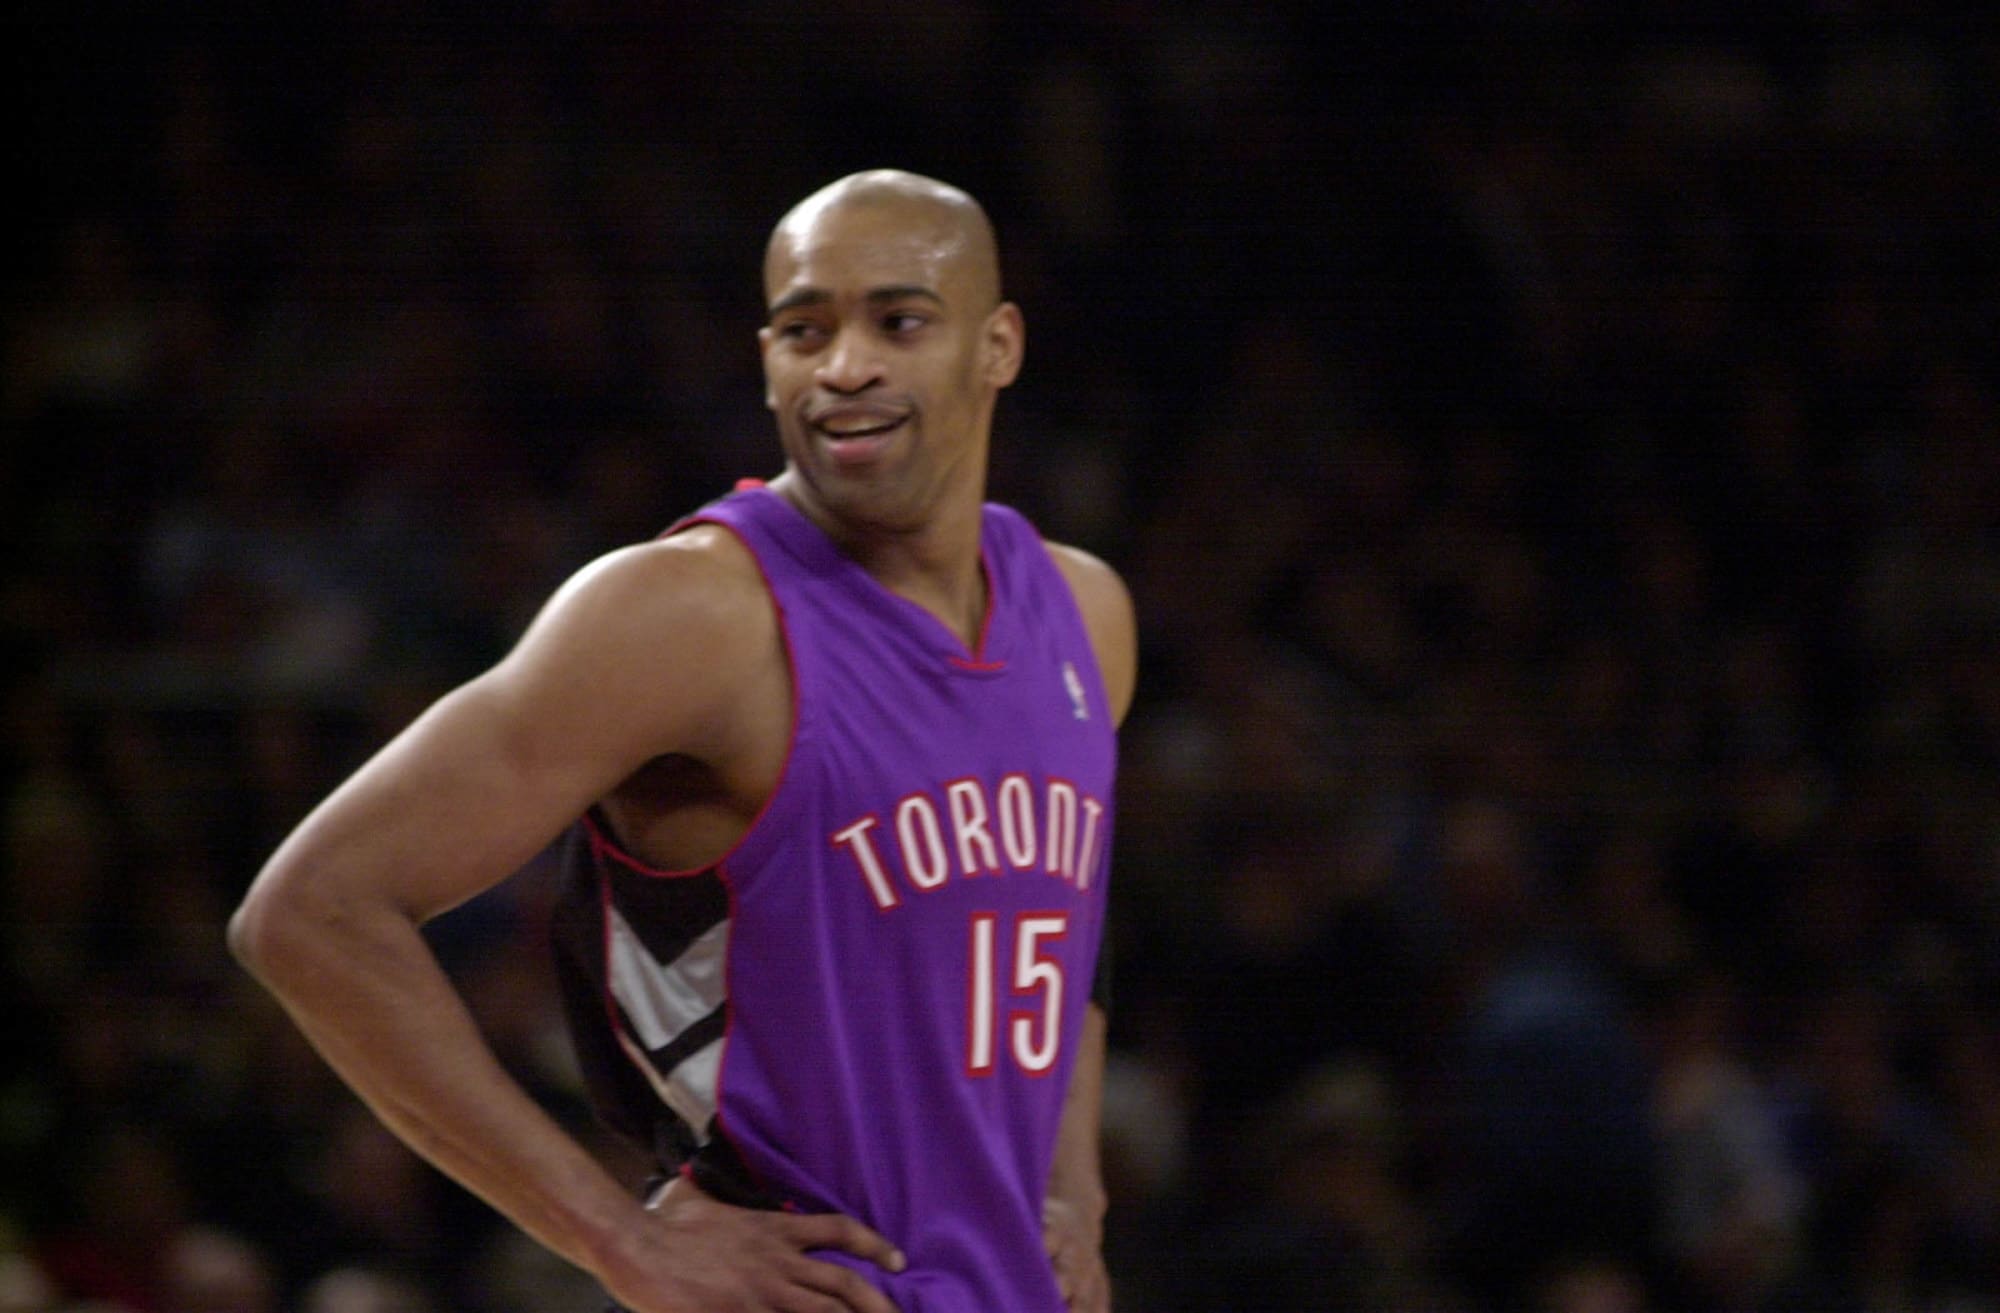 Was Vince Carter at his best when with the Toronto Raptors?